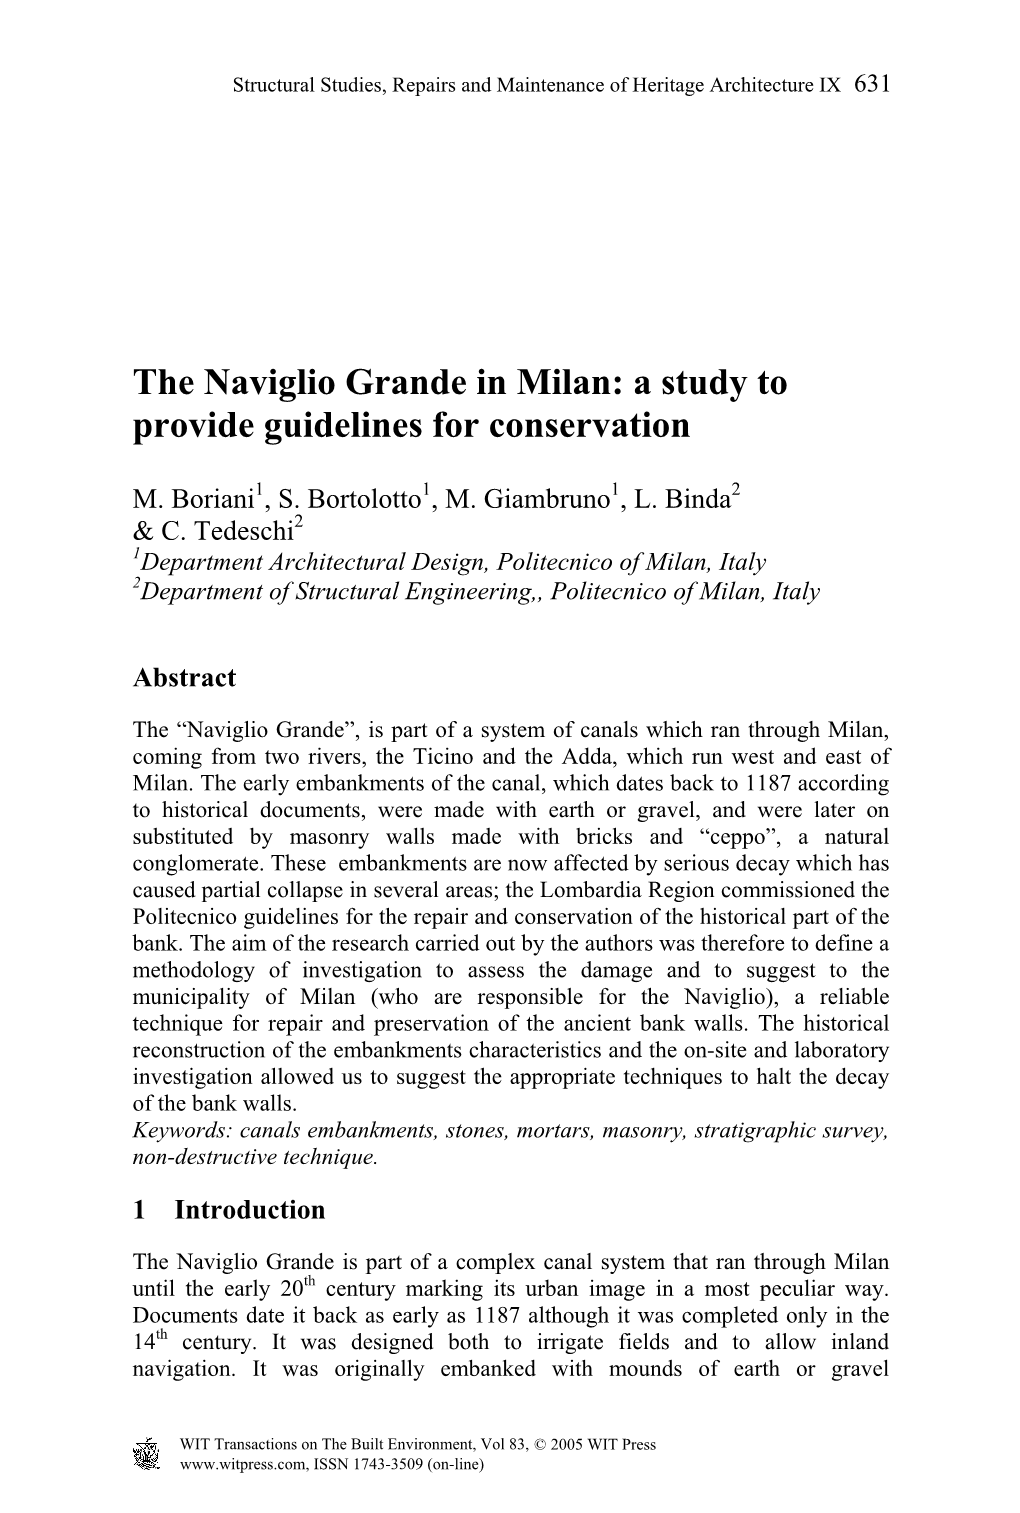 The Naviglio Grande in Milan: a Study to Provide Guidelines for Conservation